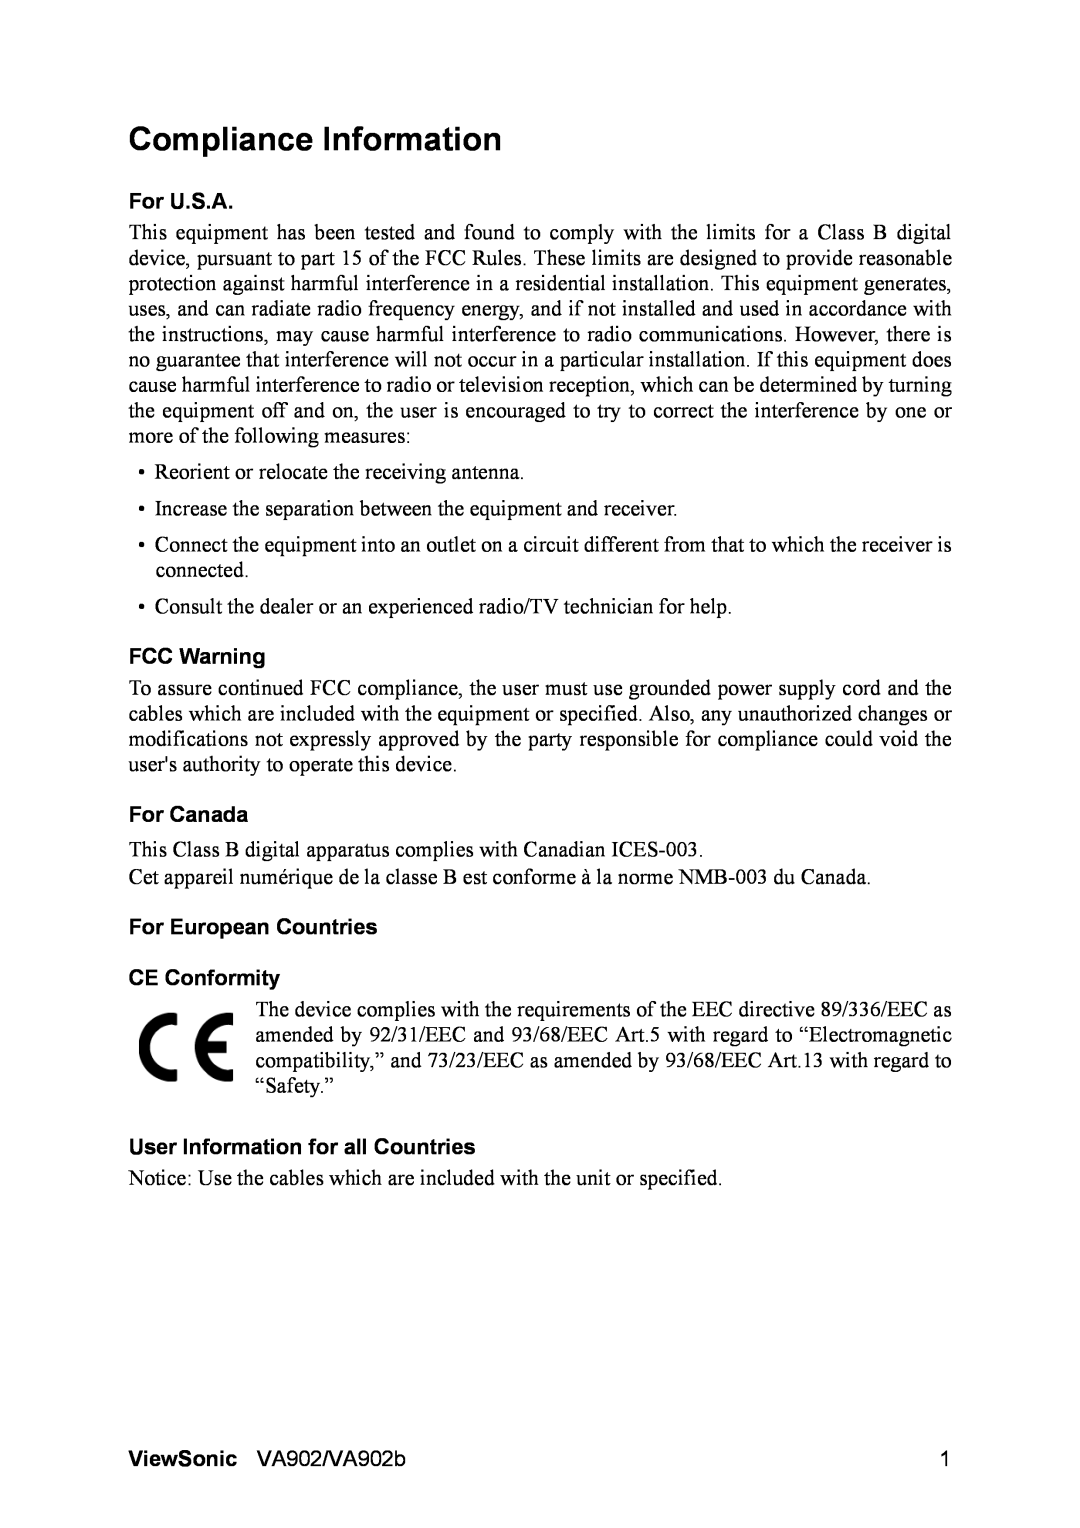 ViewSonic VA902 manual Compliance Information, For U.S.A, FCC Warning, For Canada, For European Countries CE Conformity 